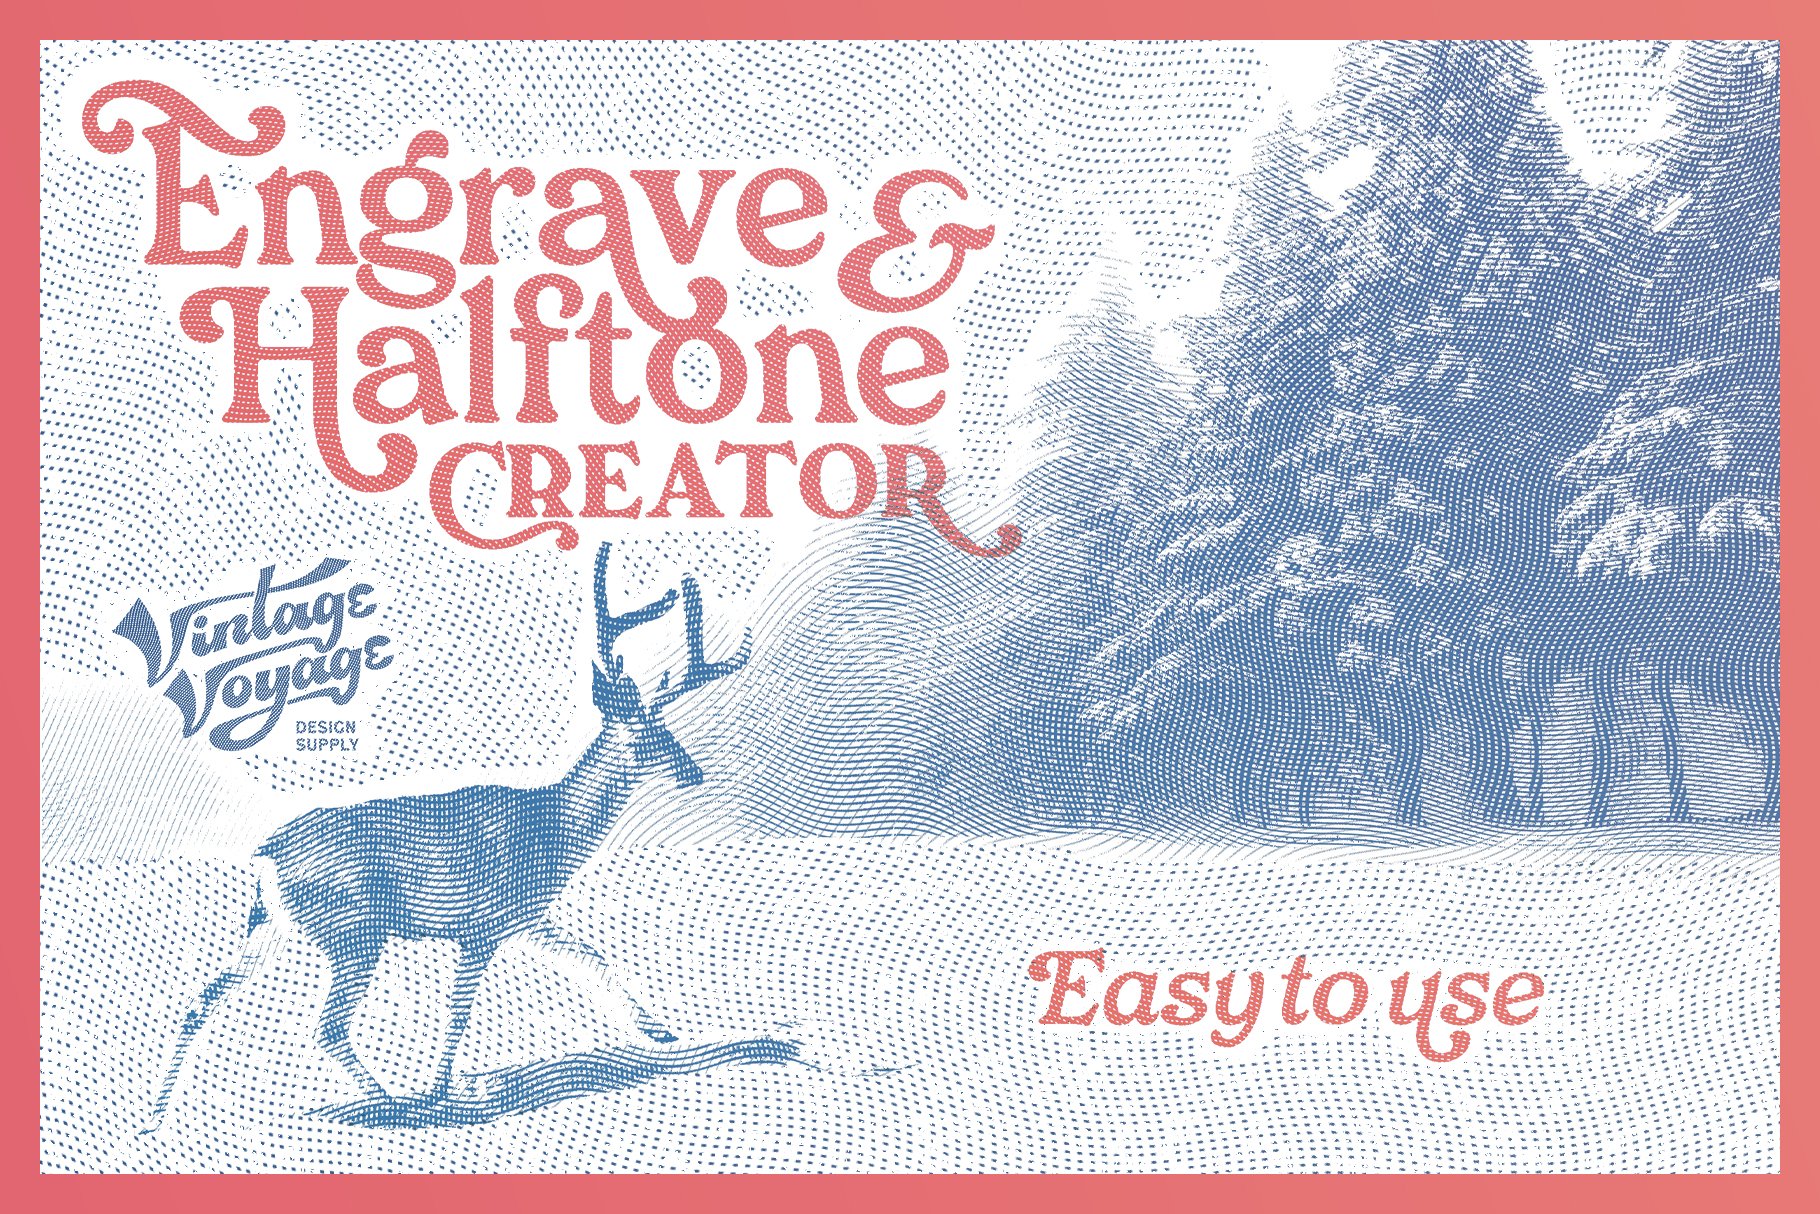 Engrave and Halftone Creatorcover image.